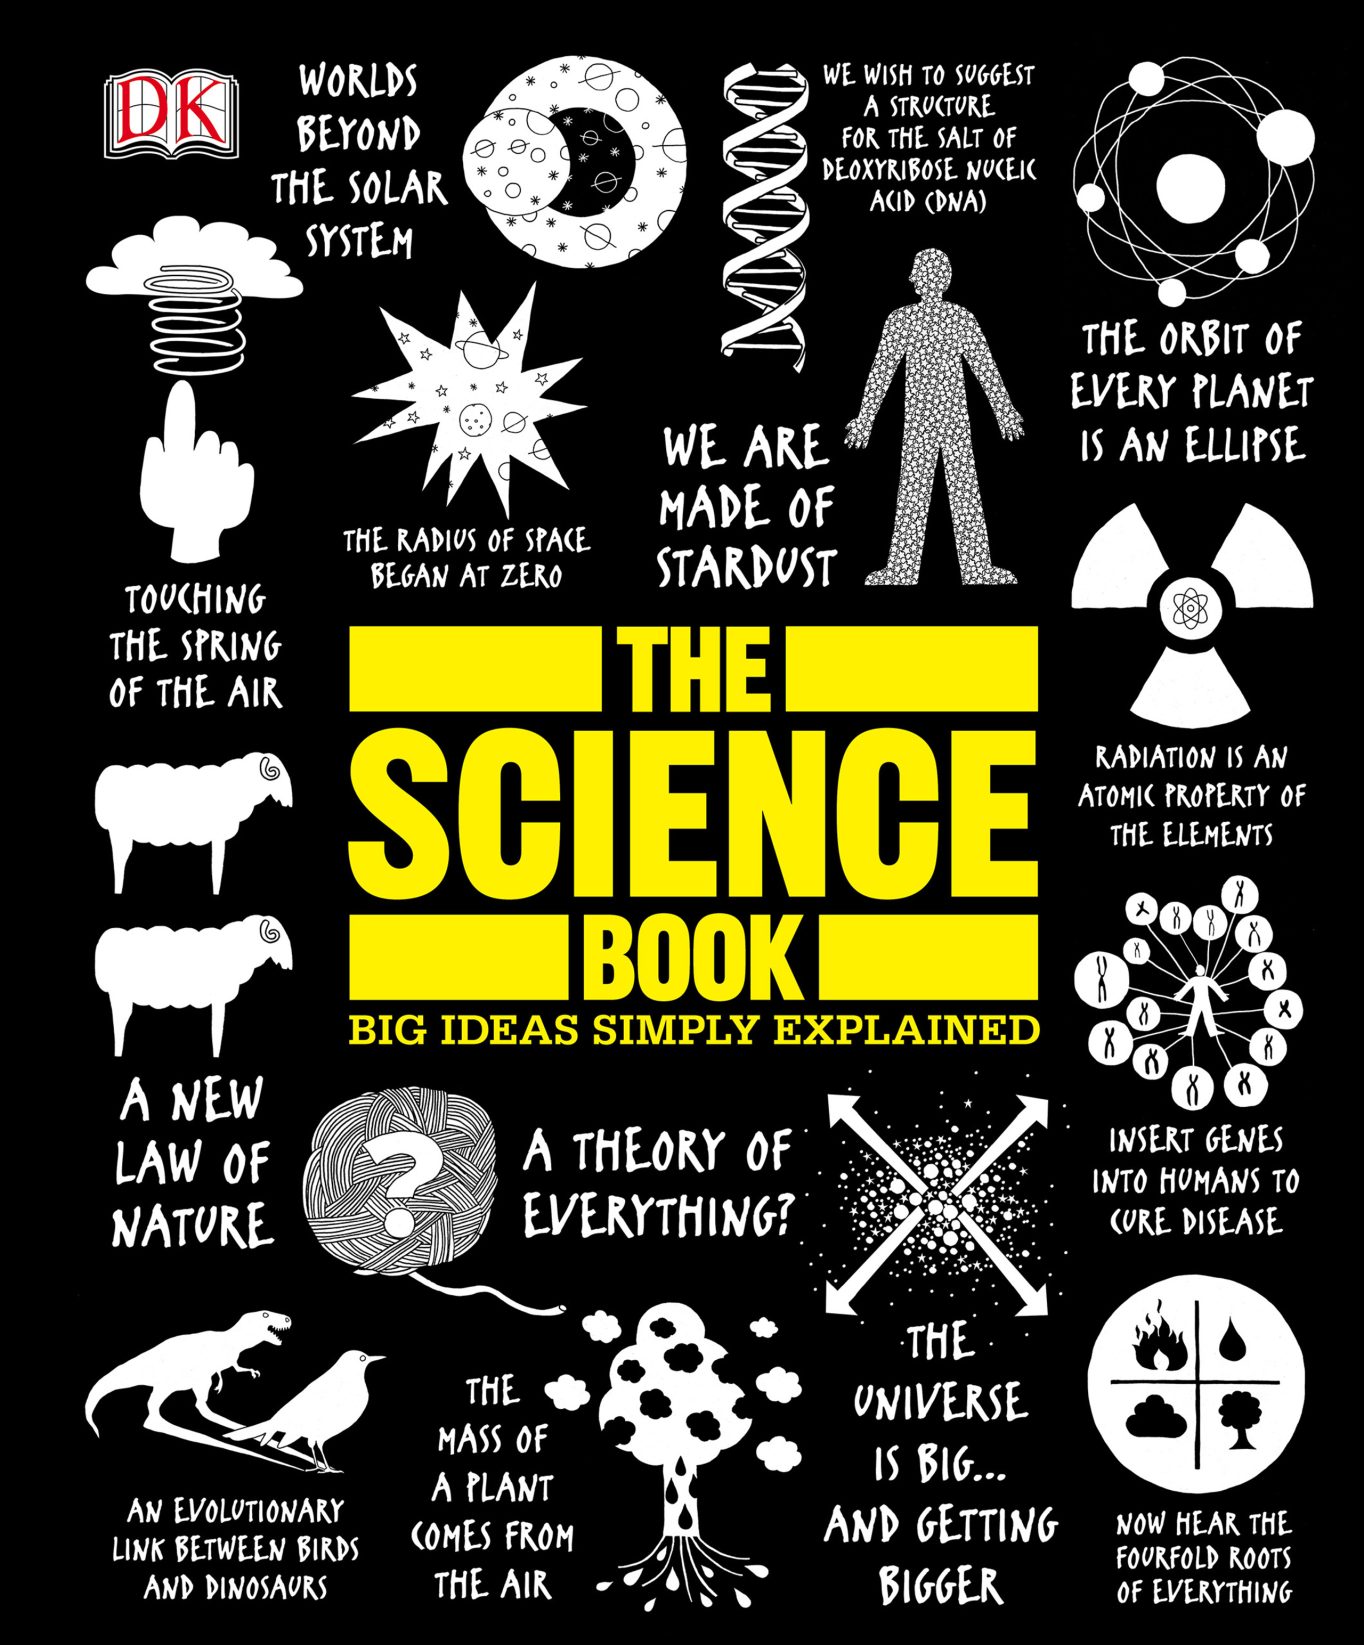 Rich Results on Google's SERP when searching for 'The Science Book'